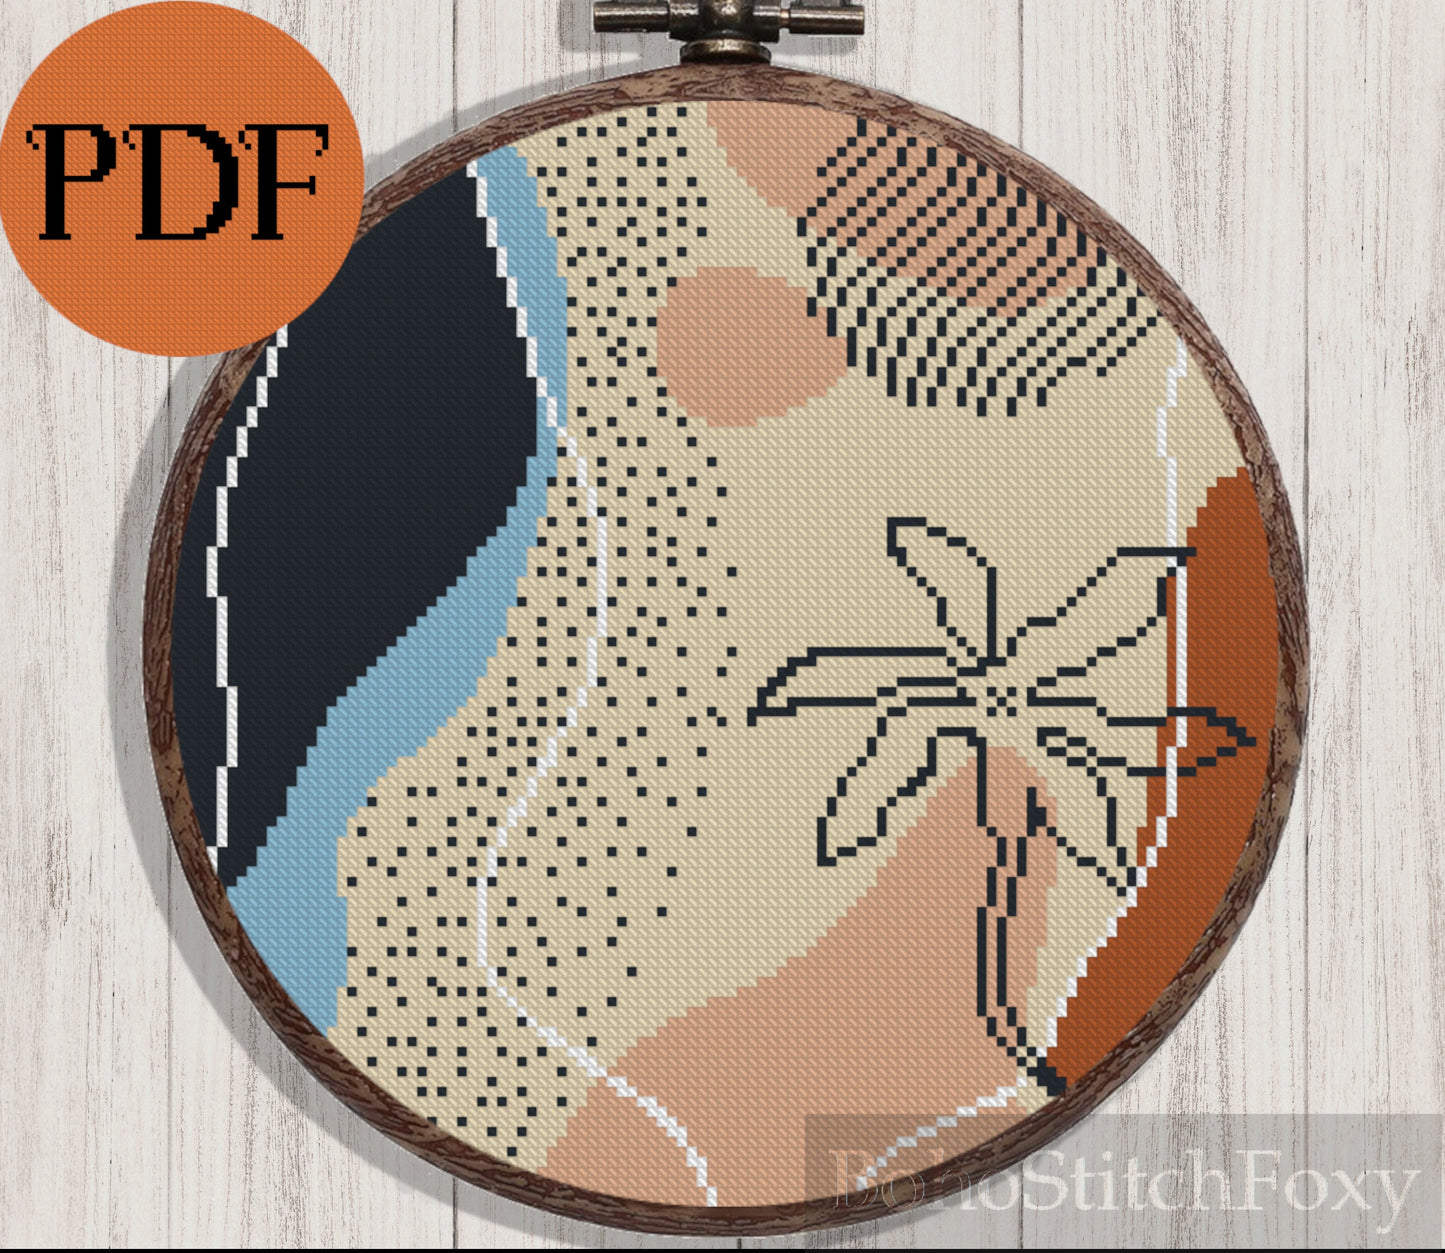 Abstract mid century modern boho floral cross stitch pattern